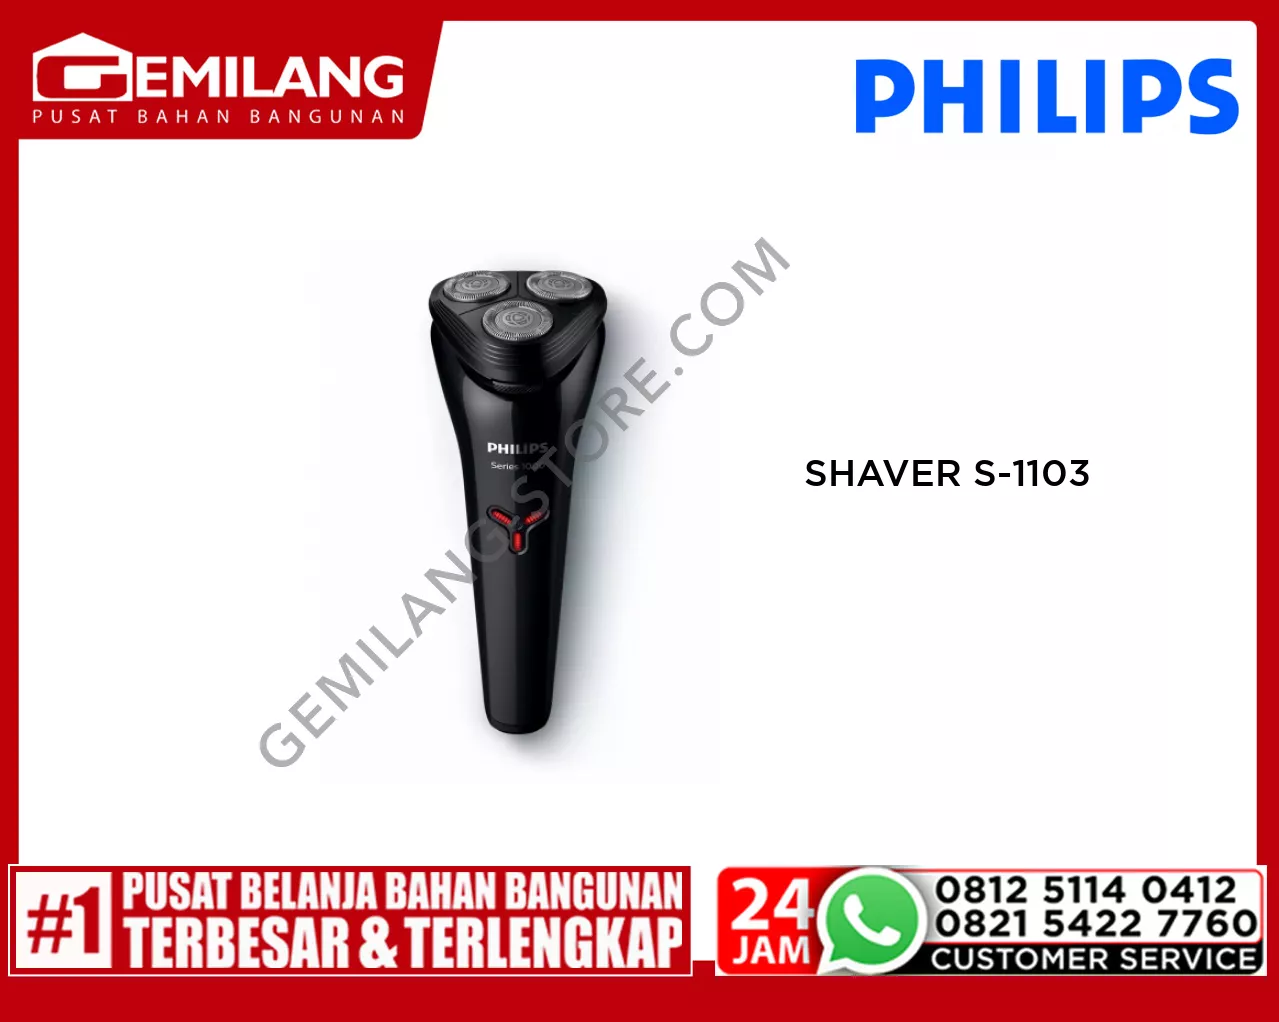 PHILIPS SHAVER S-1103